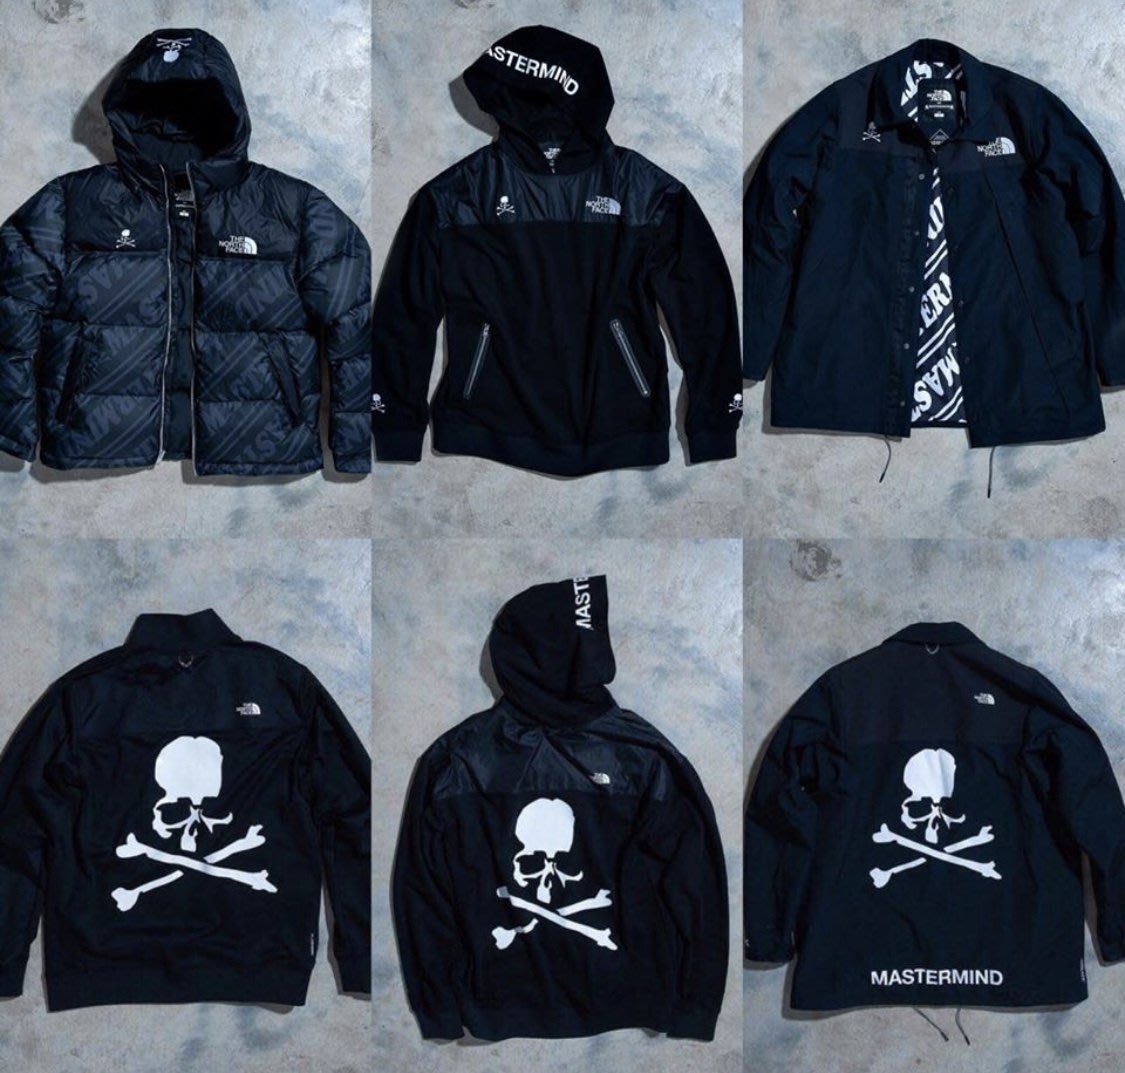 mastermind world x the north face